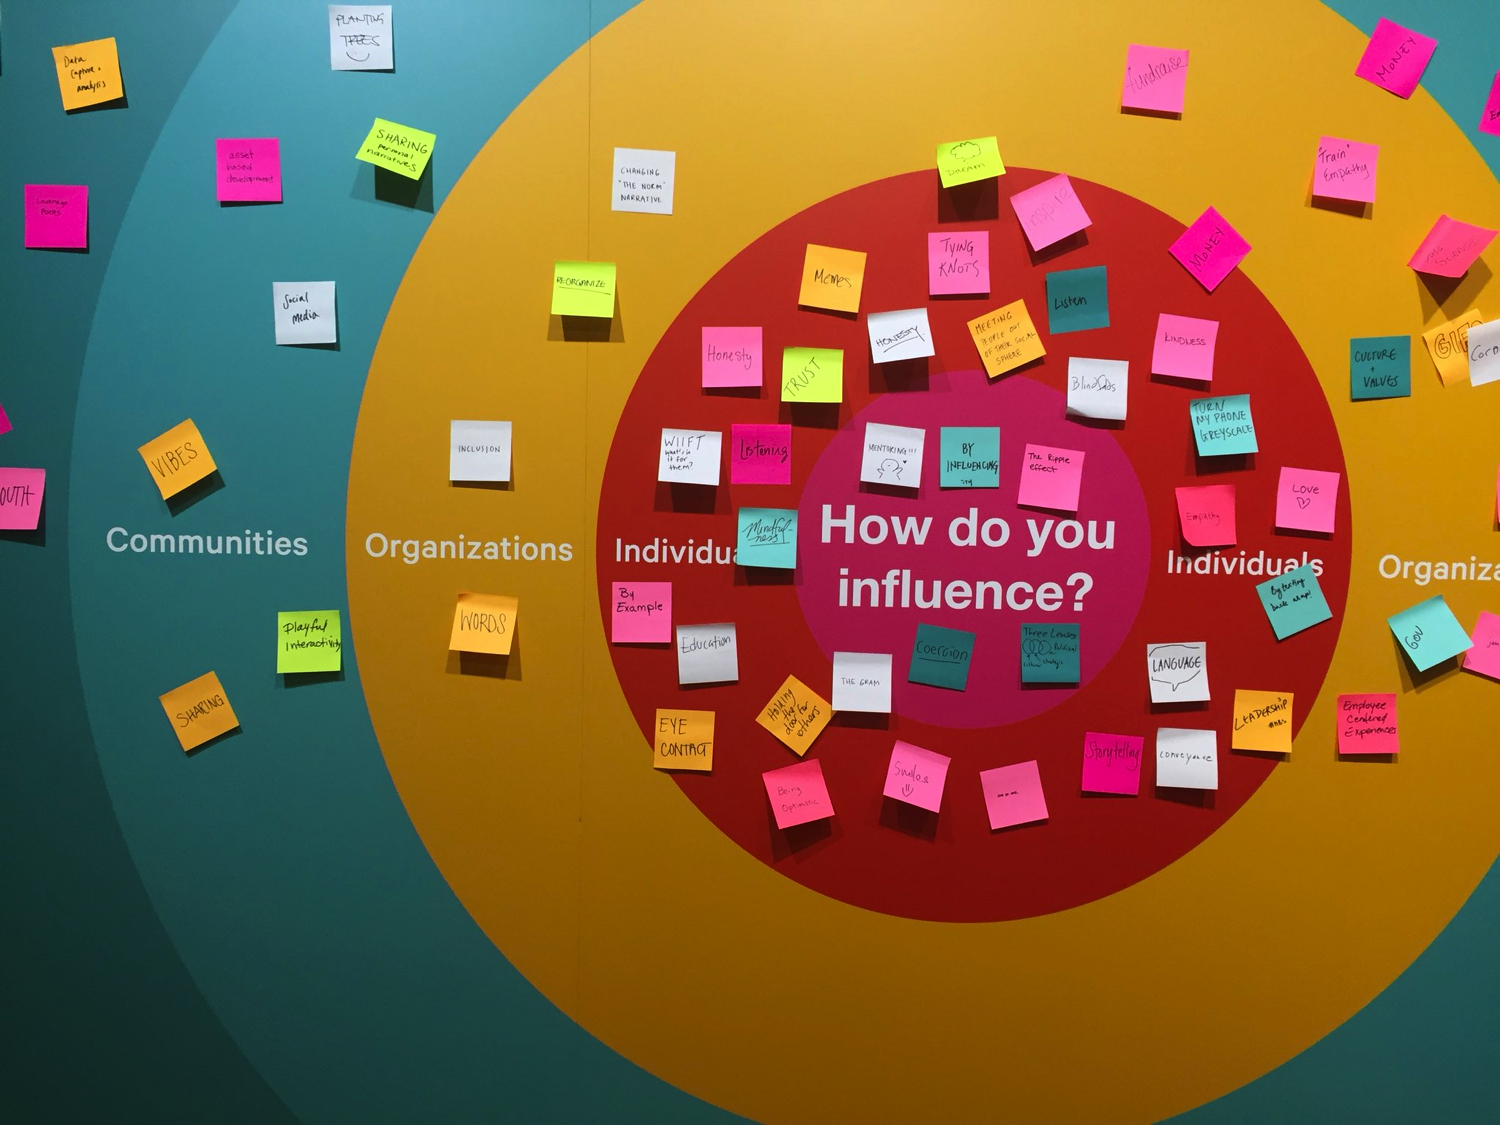 Image of a wall painted with colorful concentric circles. In the smallest middle circle is a written prompt "How do you influence?" and a bunch of colorful sticky notes are spread out throughout the wall.